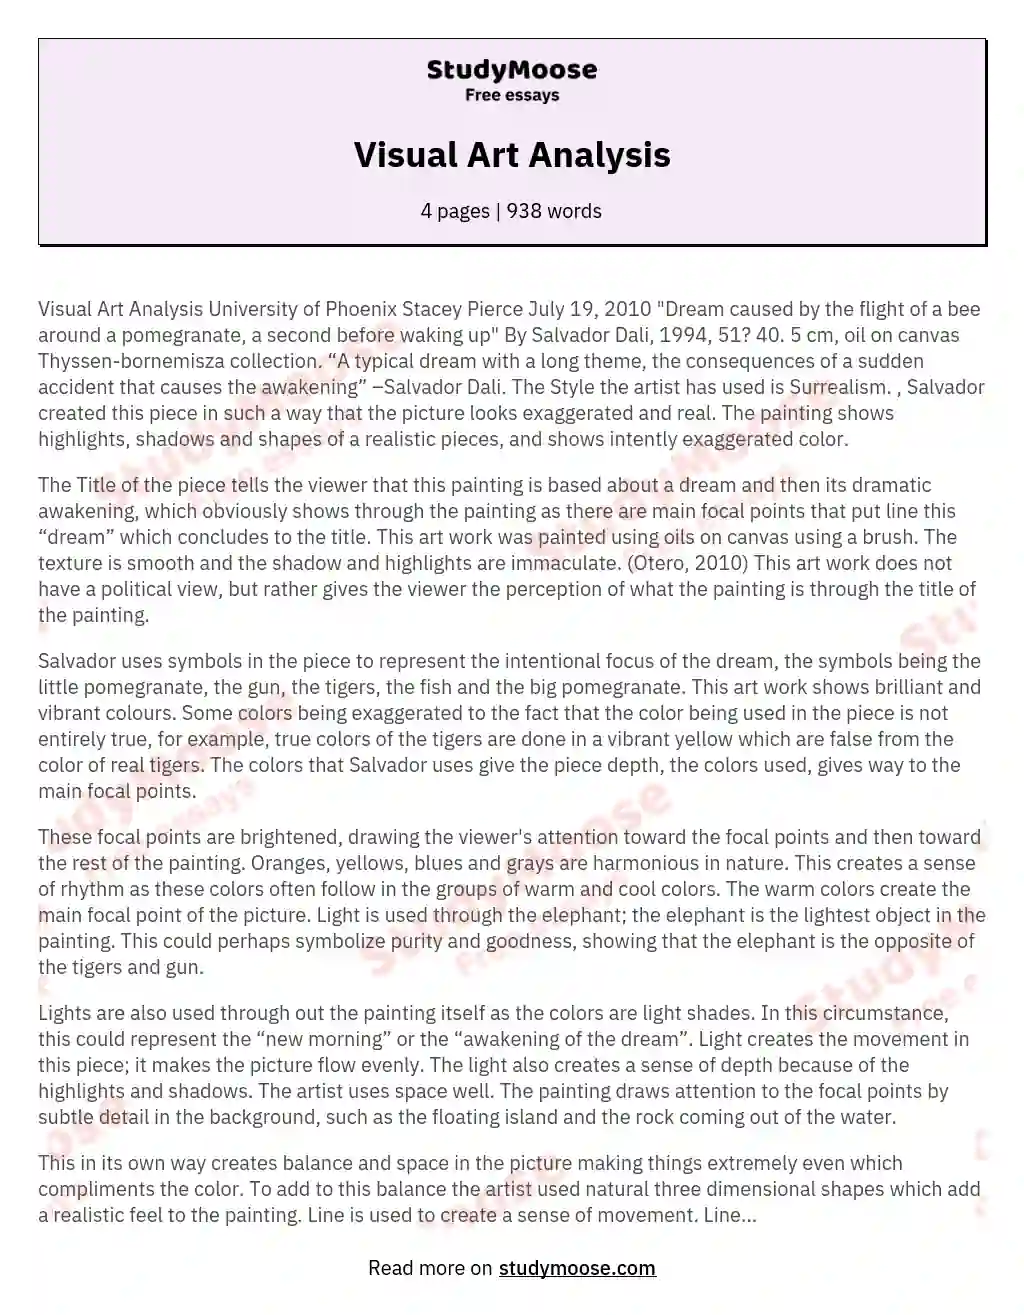 essay about the art